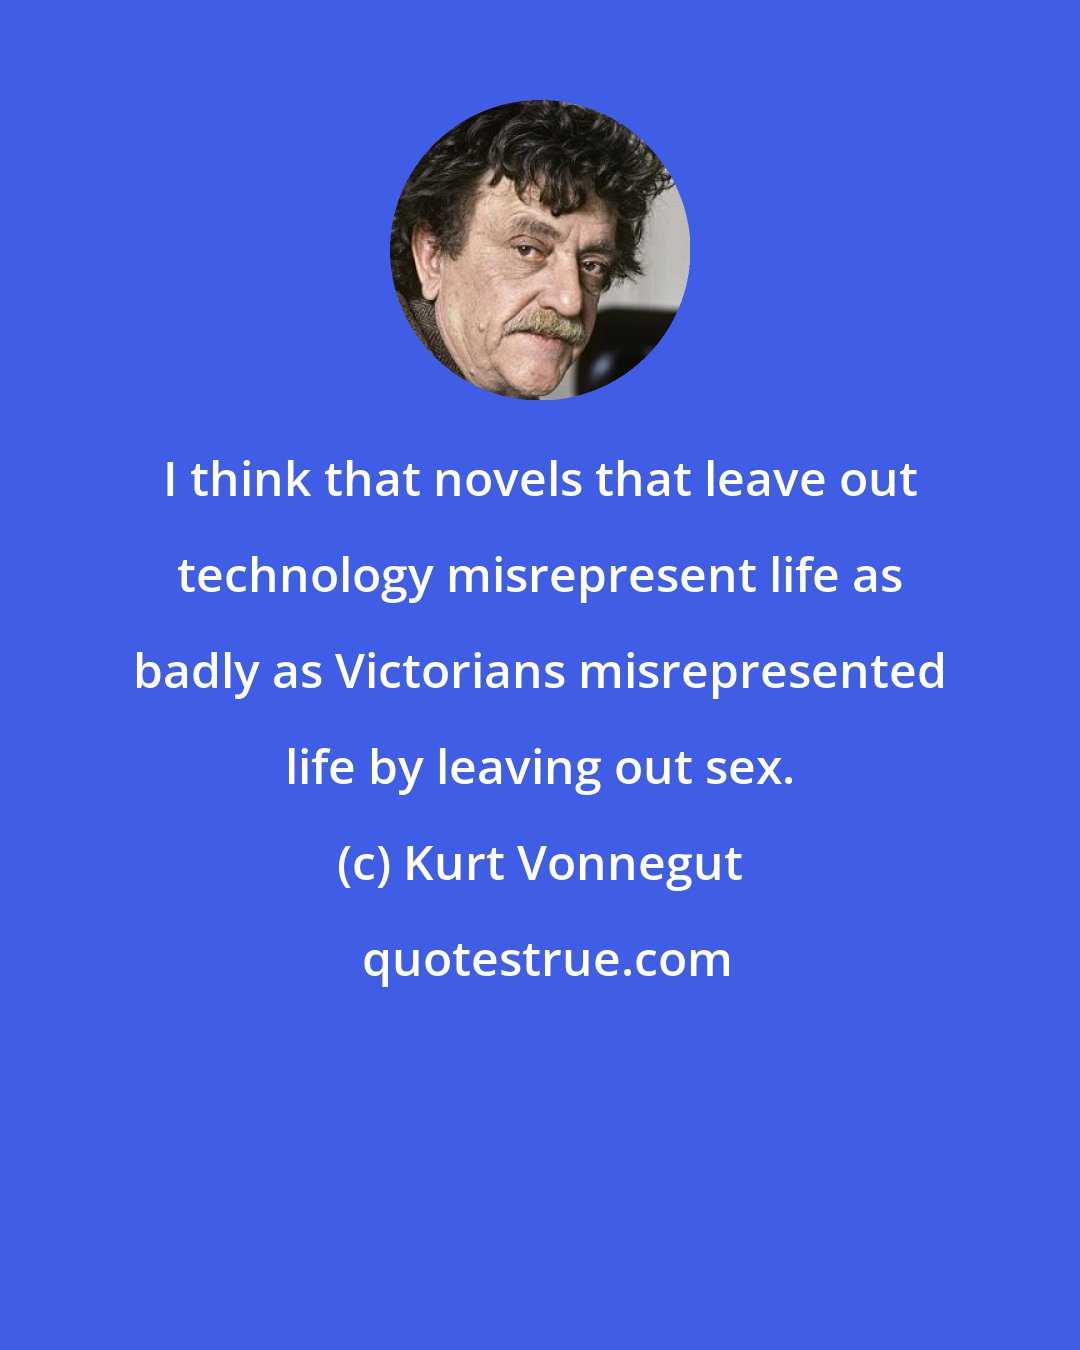 Kurt Vonnegut: I think that novels that leave out technology misrepresent life as badly as Victorians misrepresented life by leaving out sex.